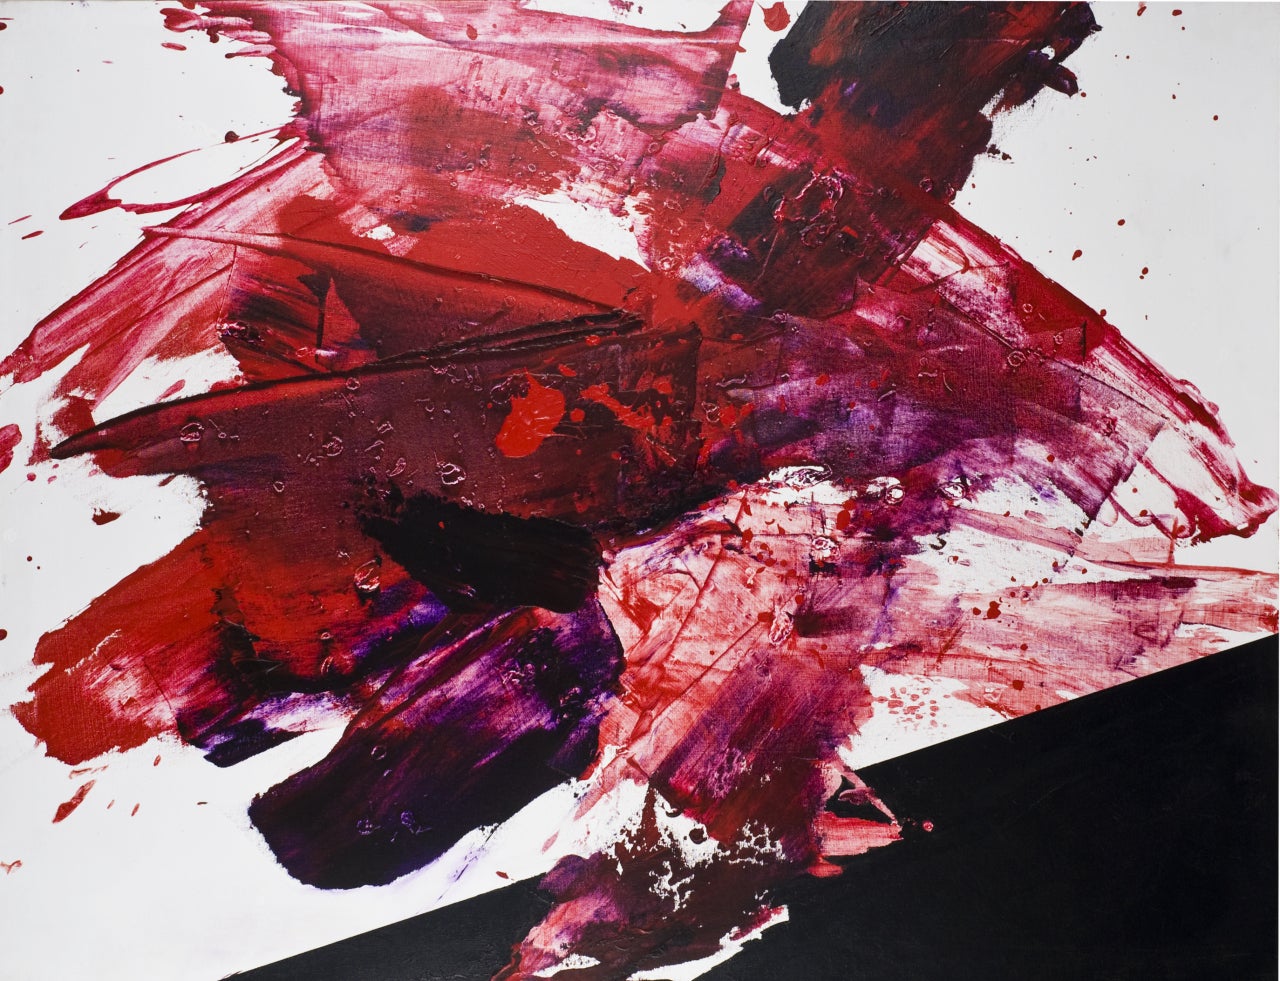 Luis Feito López Abstract Painting - Luis Feito, Abstract Red and Black, Oil on canvas, 2473